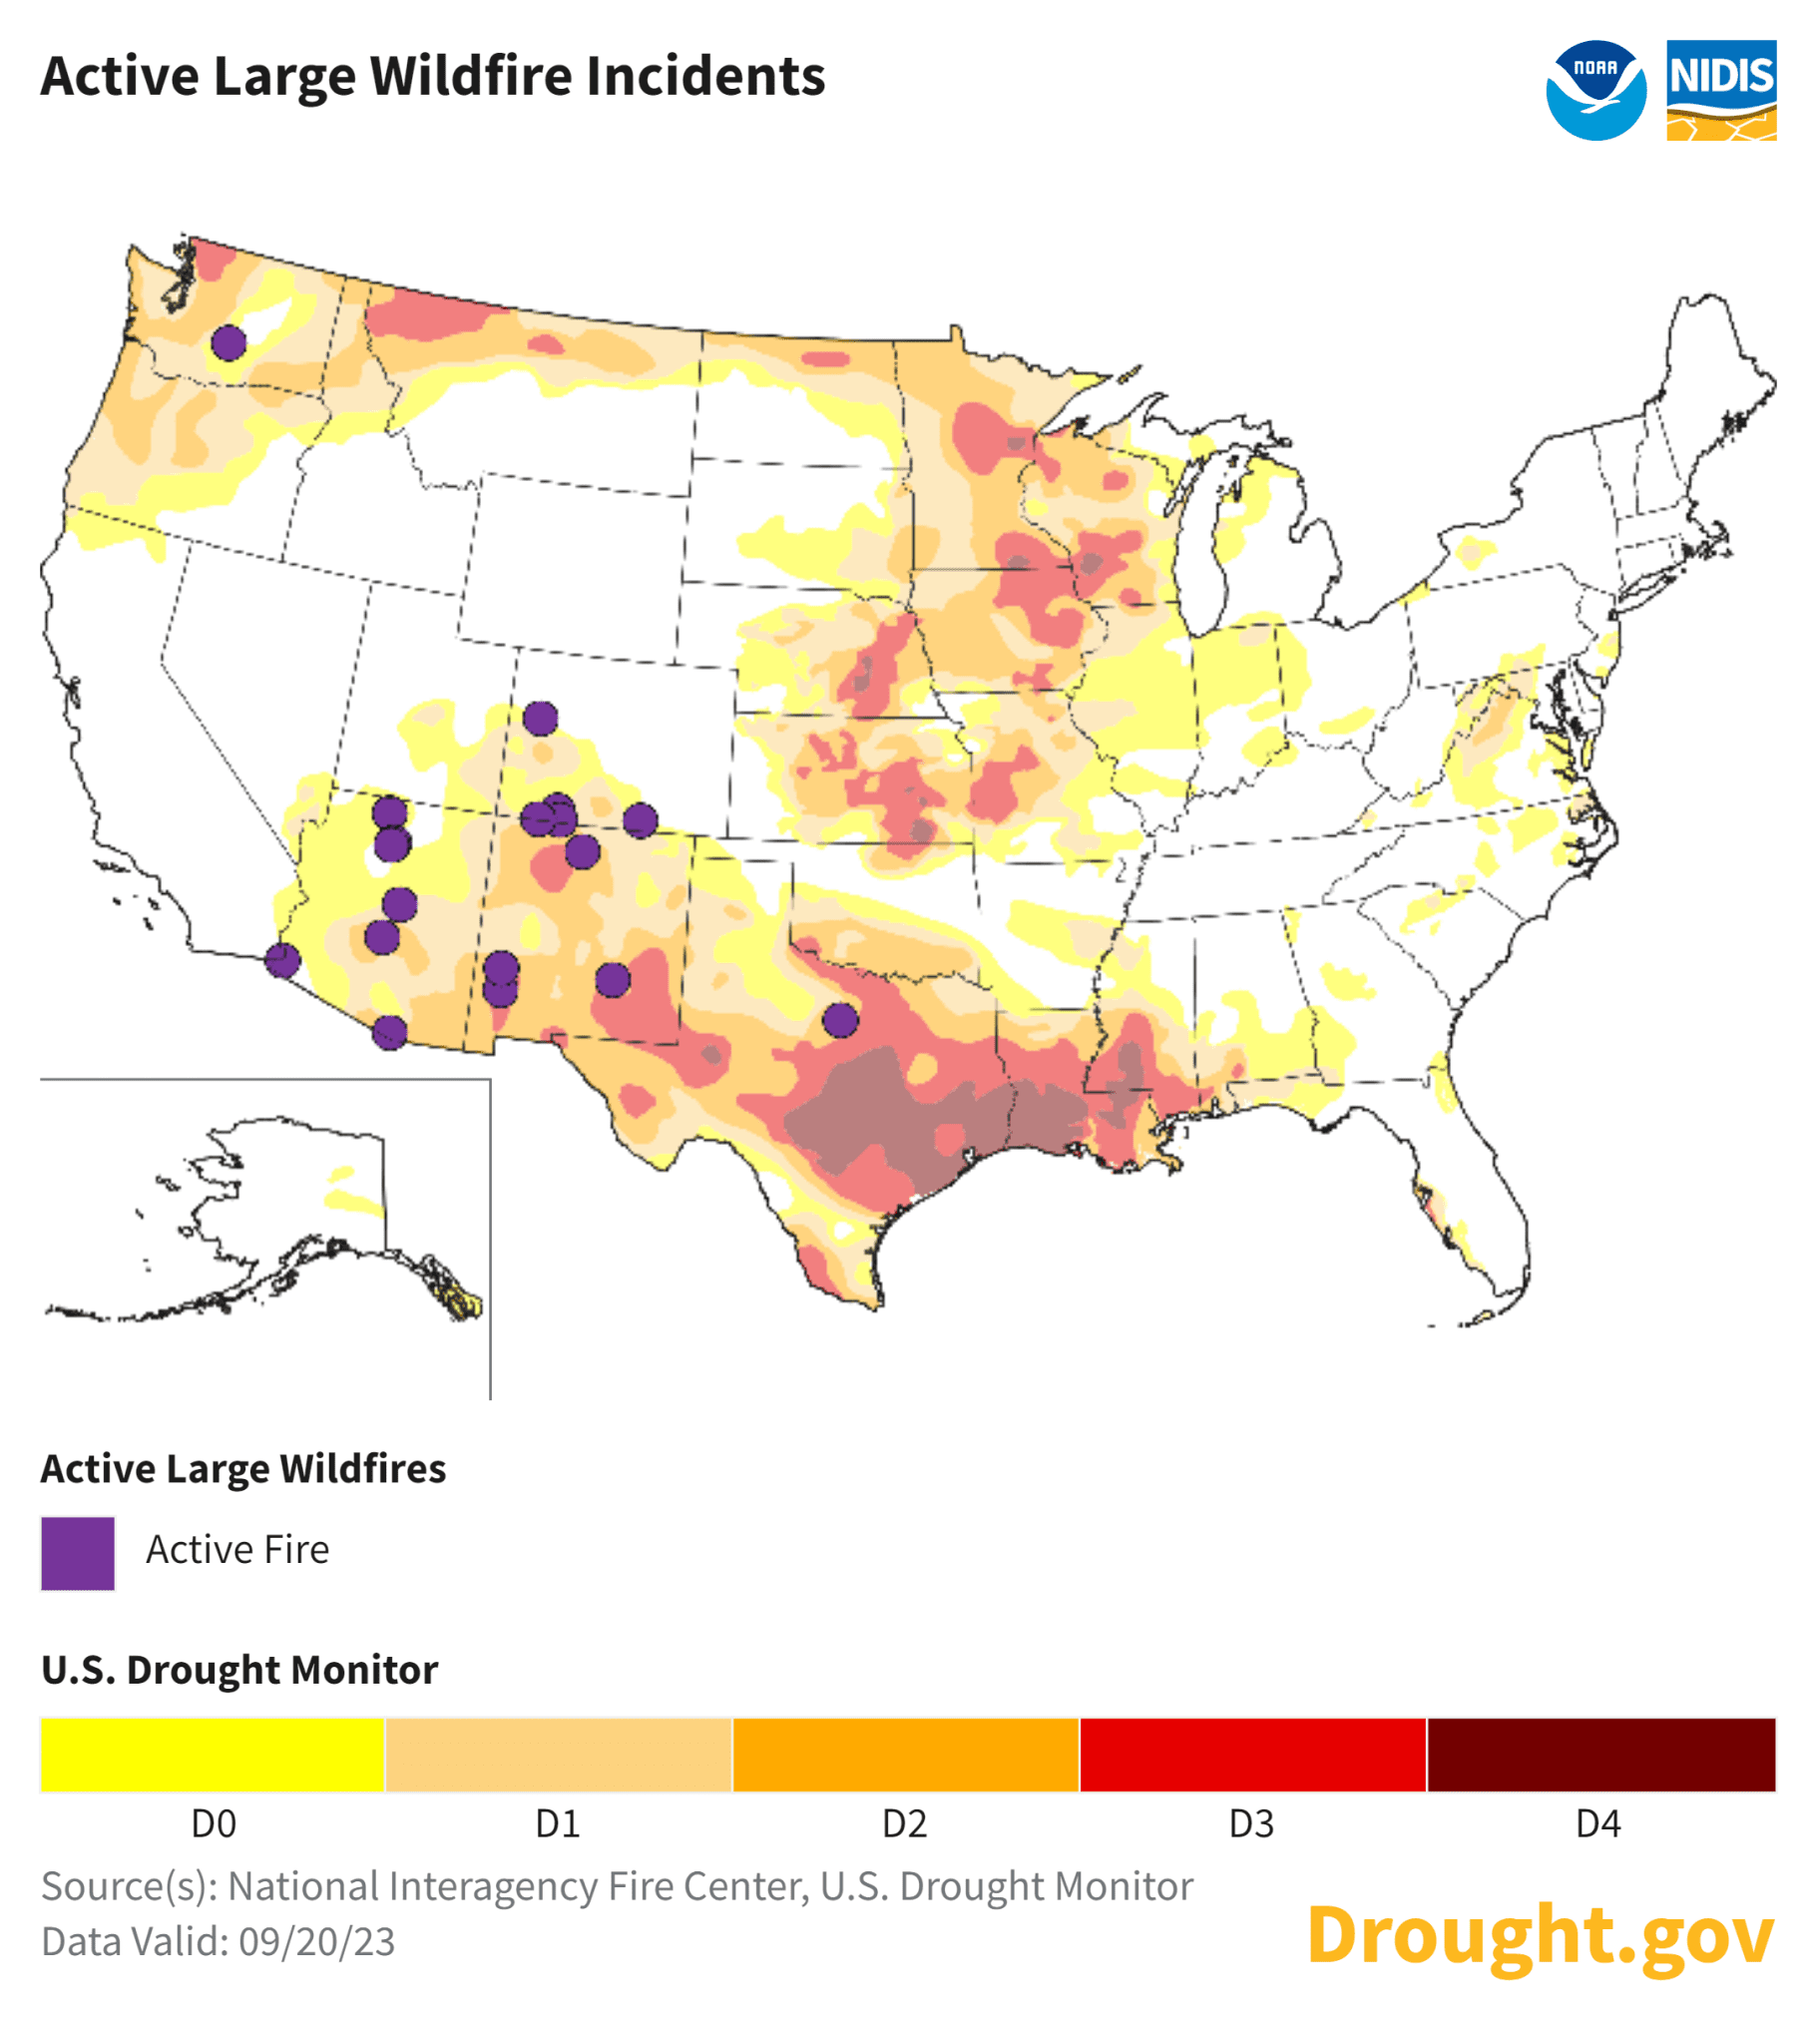 Map showing active large wildfires and areas of drought made worse by climate change.